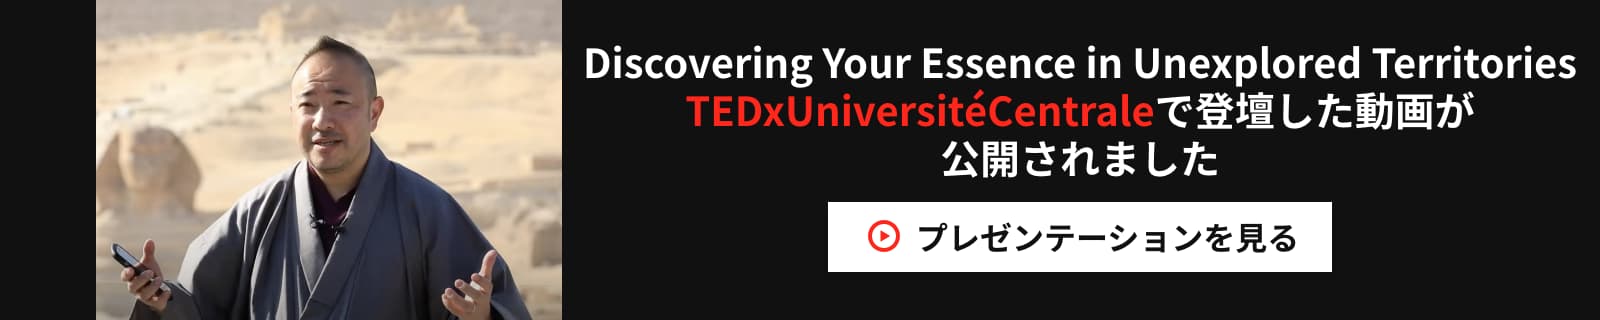 Discovering Your Essence in Unexplored TerritoriesTEDxUniversitéCentraleで登壇した動画が公開されました プレゼンテーションを見る